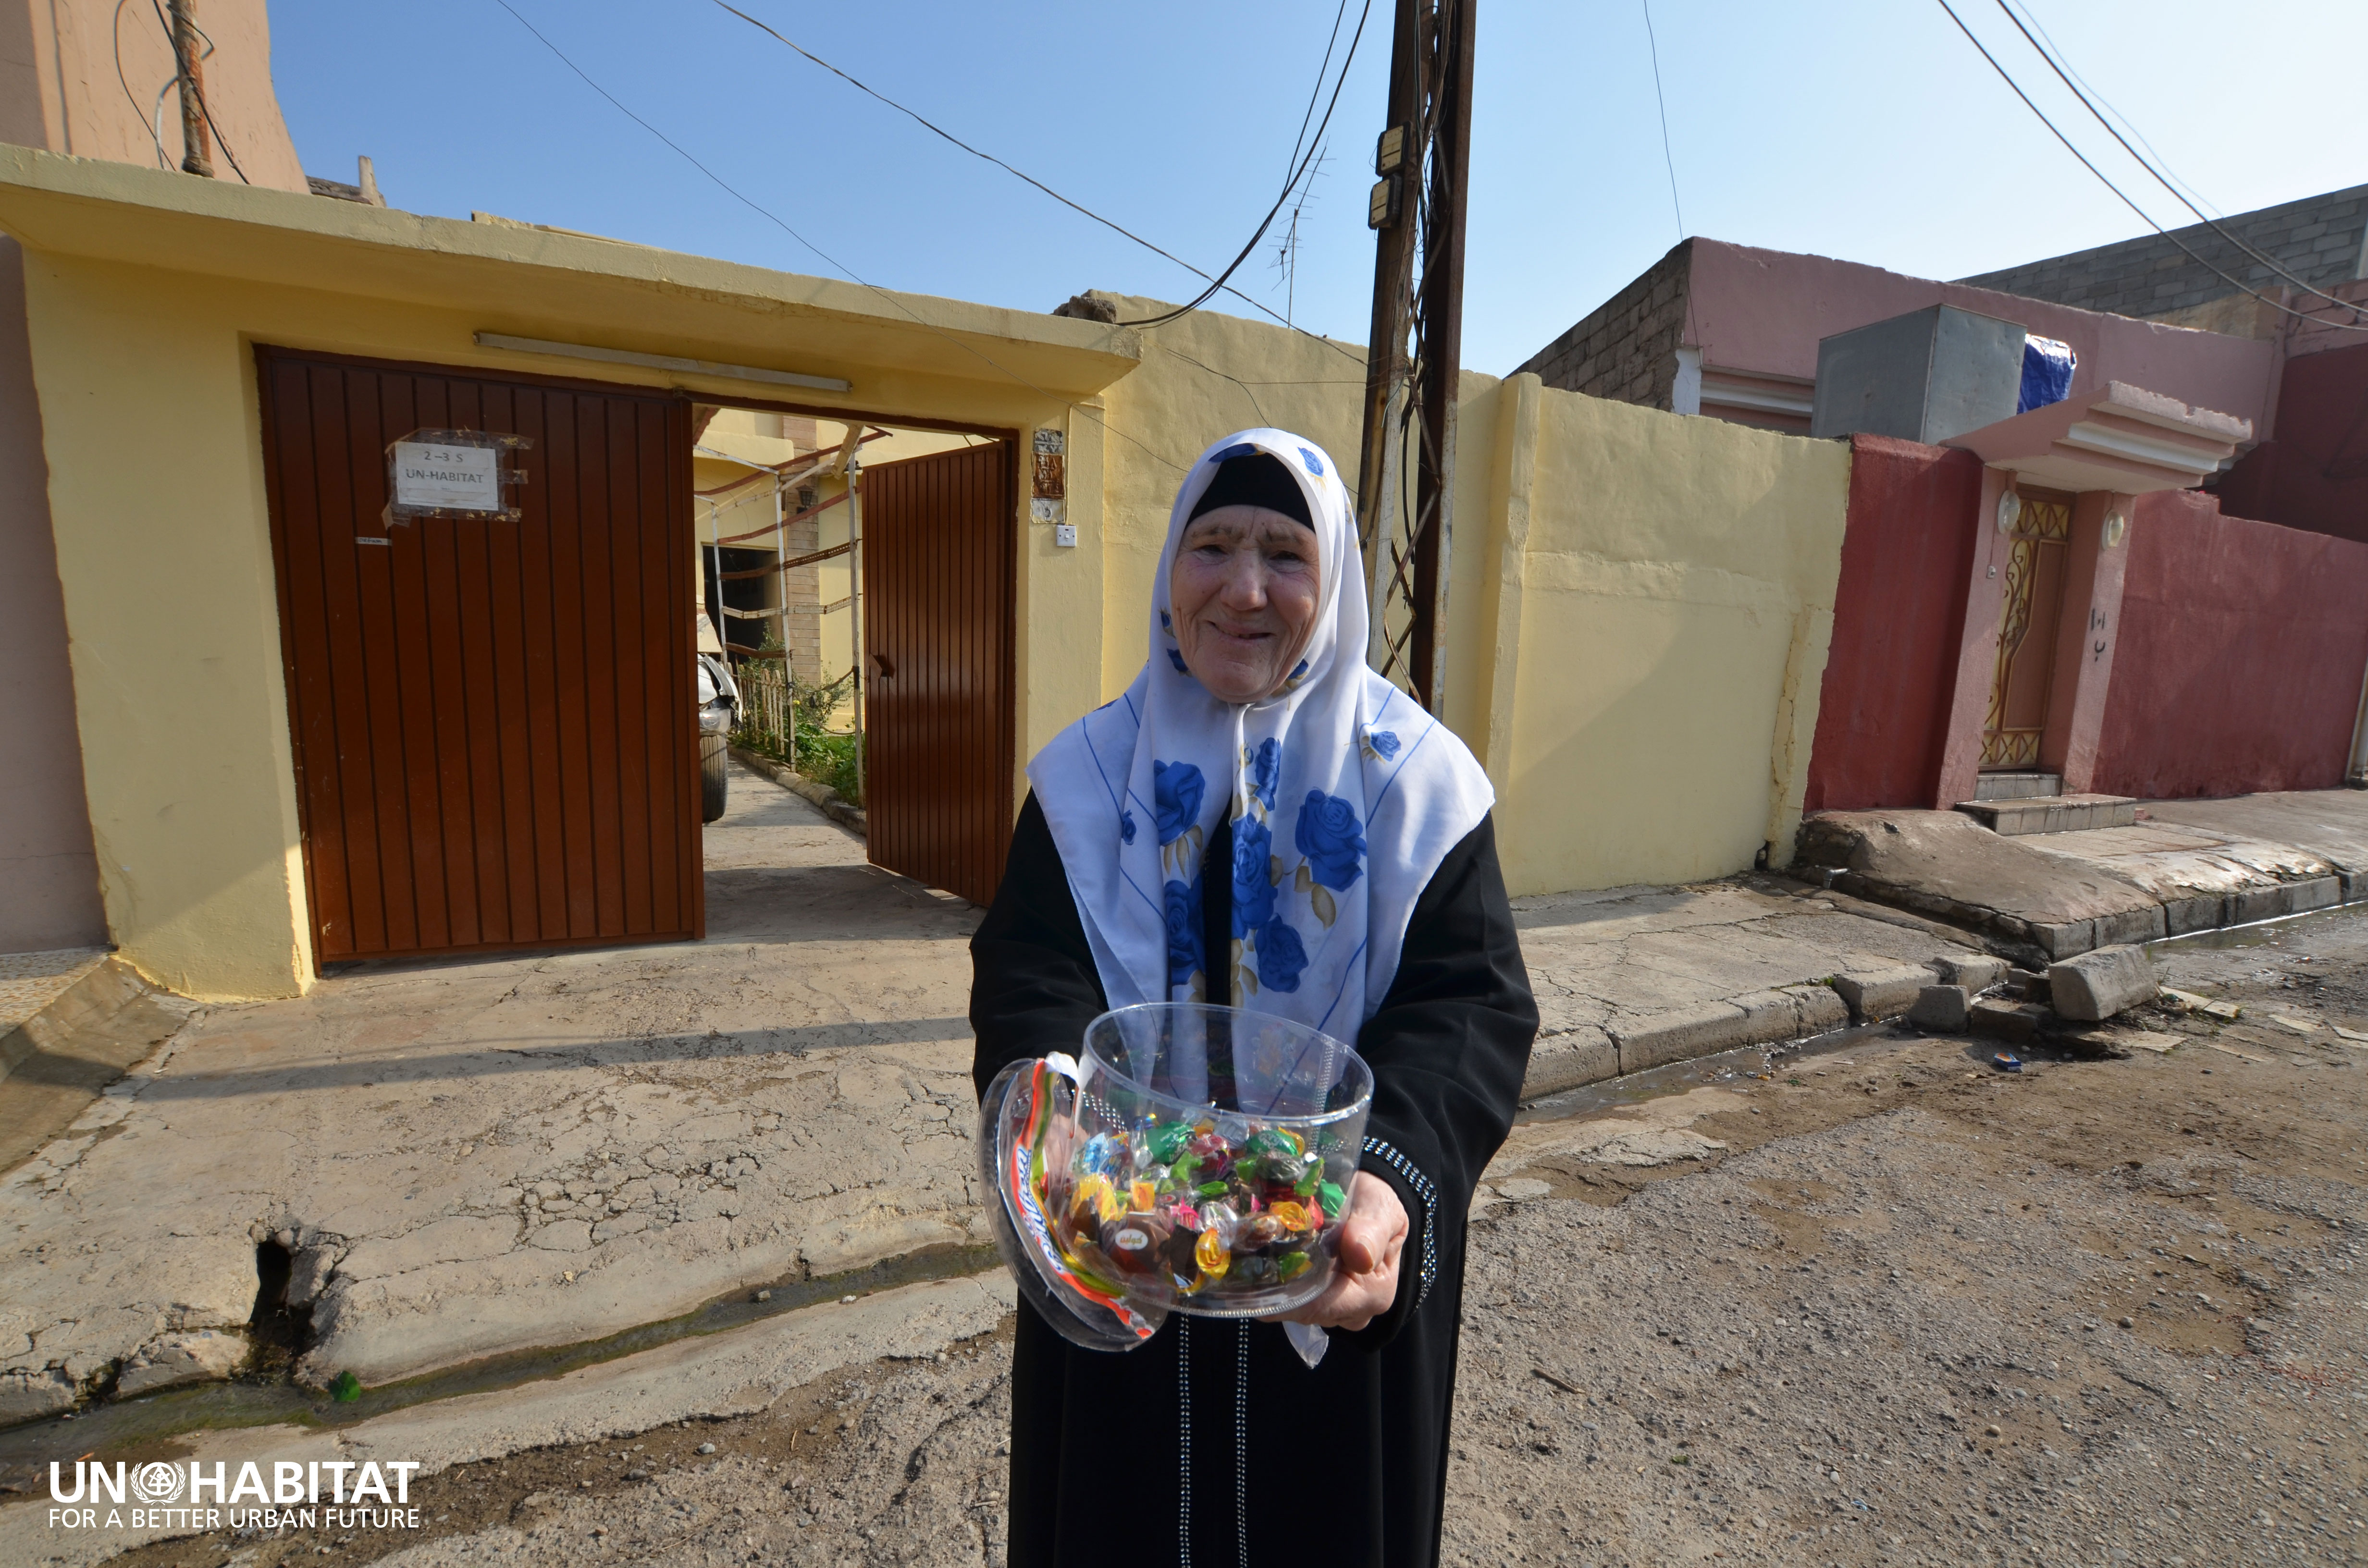 A beneficiary woman in Mosul greets the UN-Habitat team in front of her rehabilitated house 